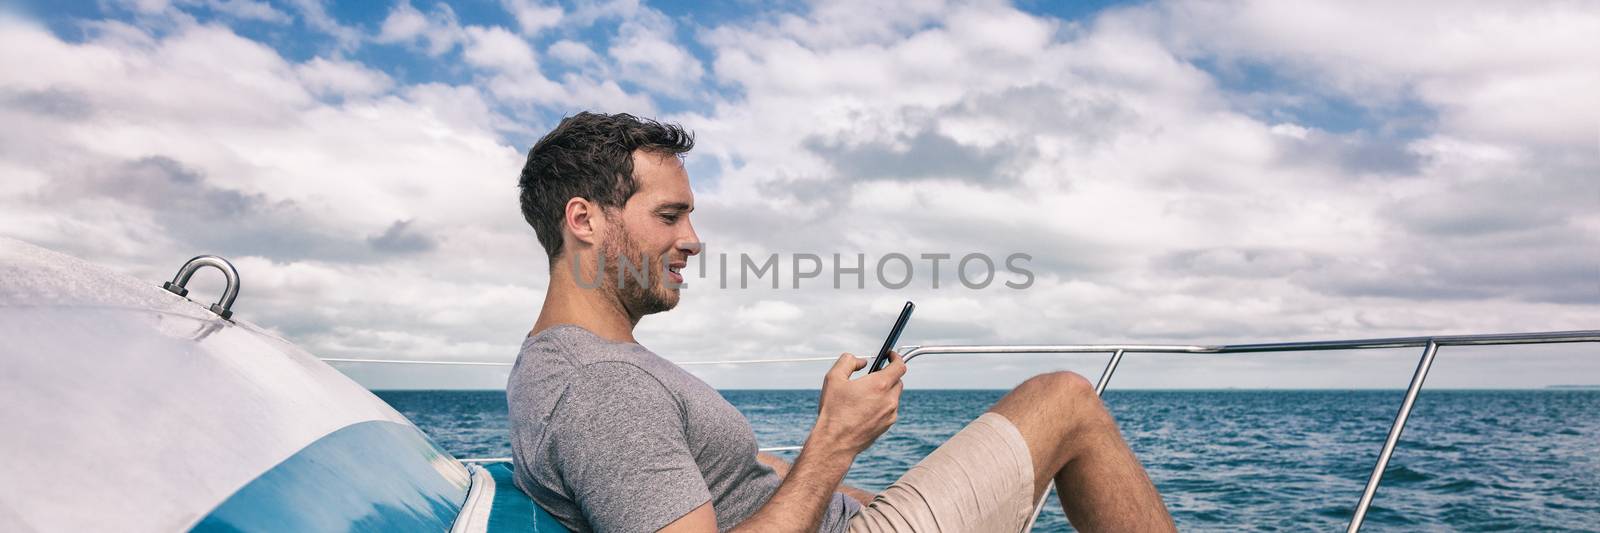 Yacht luxury lifestyle young man using cellphone banner panorama. Person relaxing on deck texting sms message on mobile phone under the sun summer holidays by Maridav